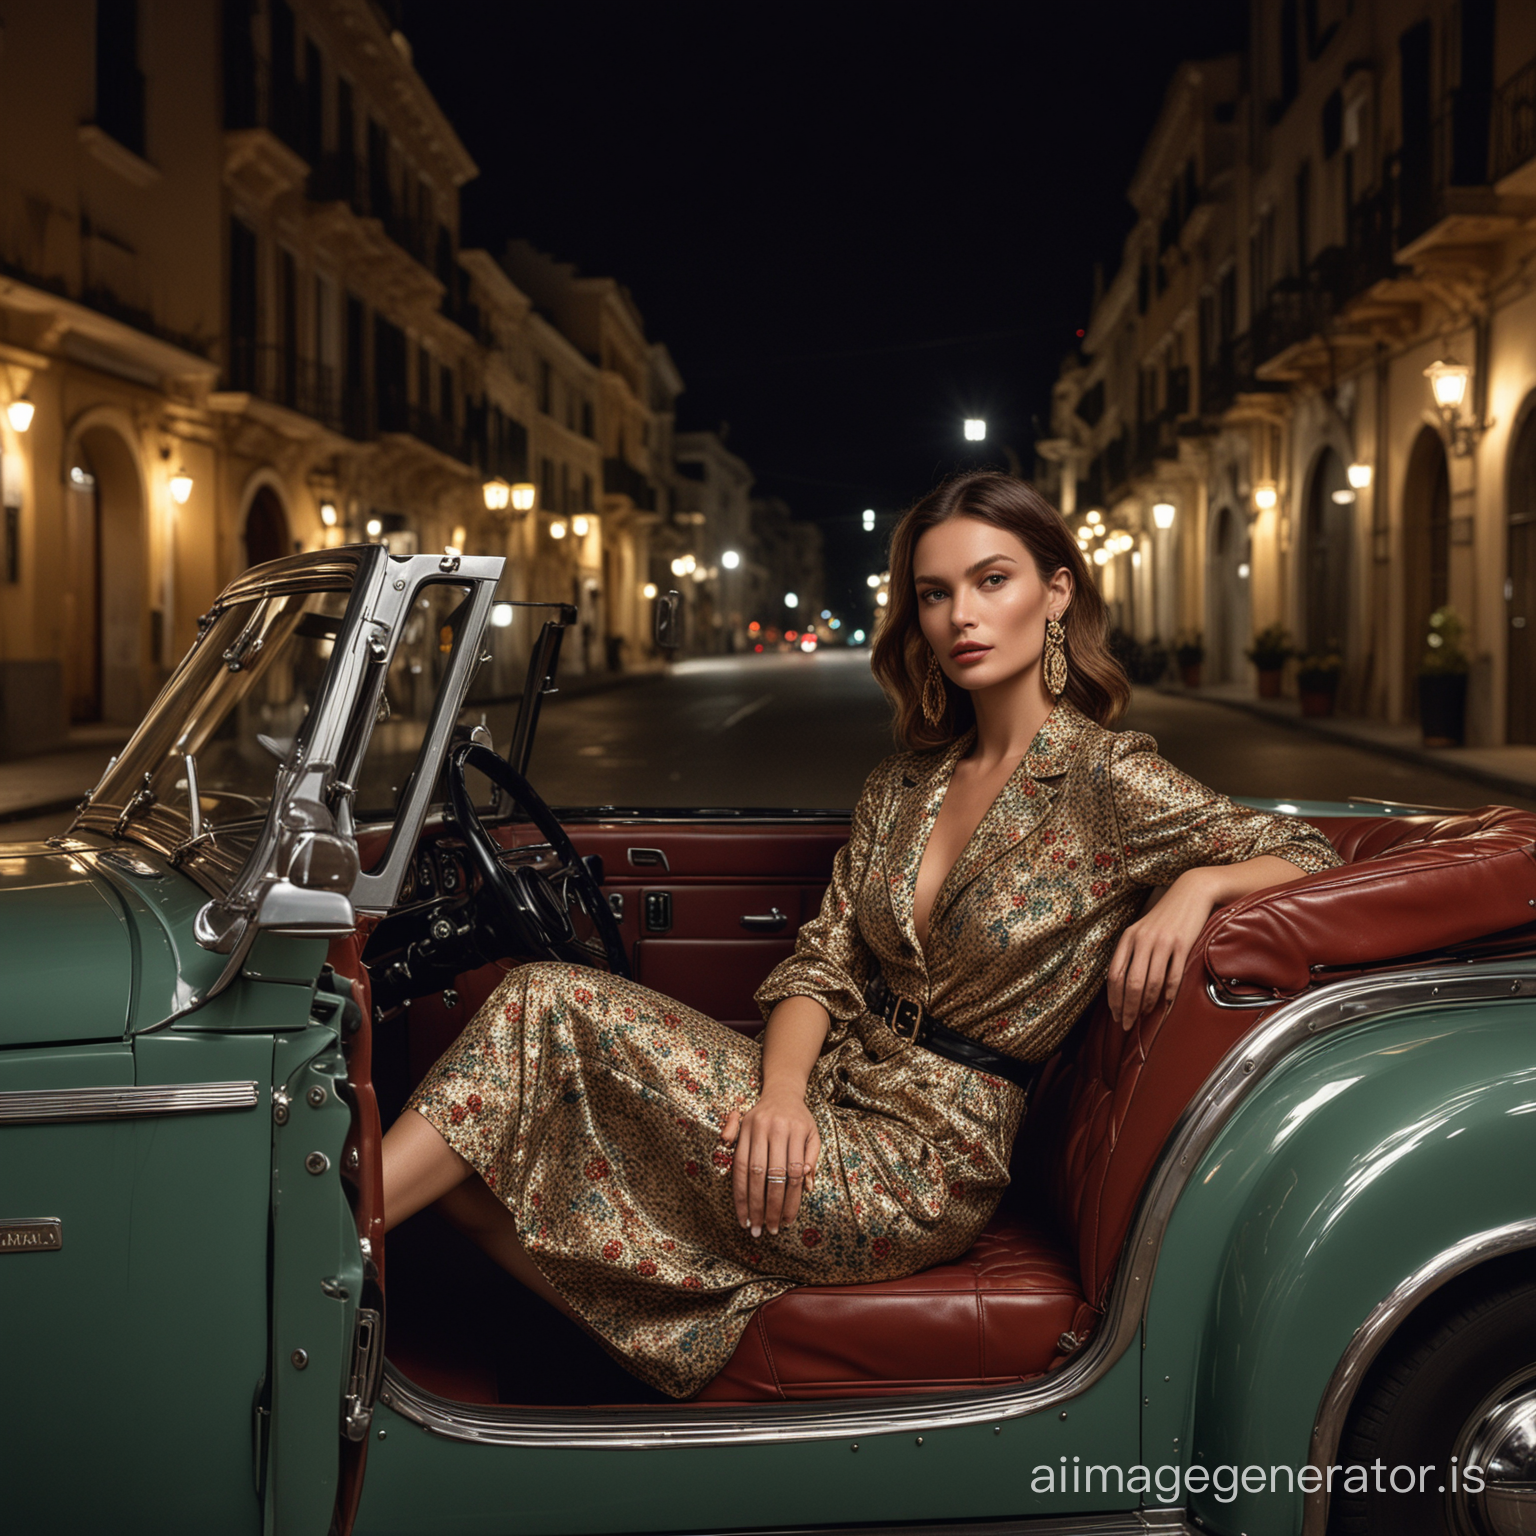 a Dolce & Gabbana style fashion campaign of a woman supermodel posing inside the back seat of a luxury vintage car, outside the car there are photographers and photographers, at night